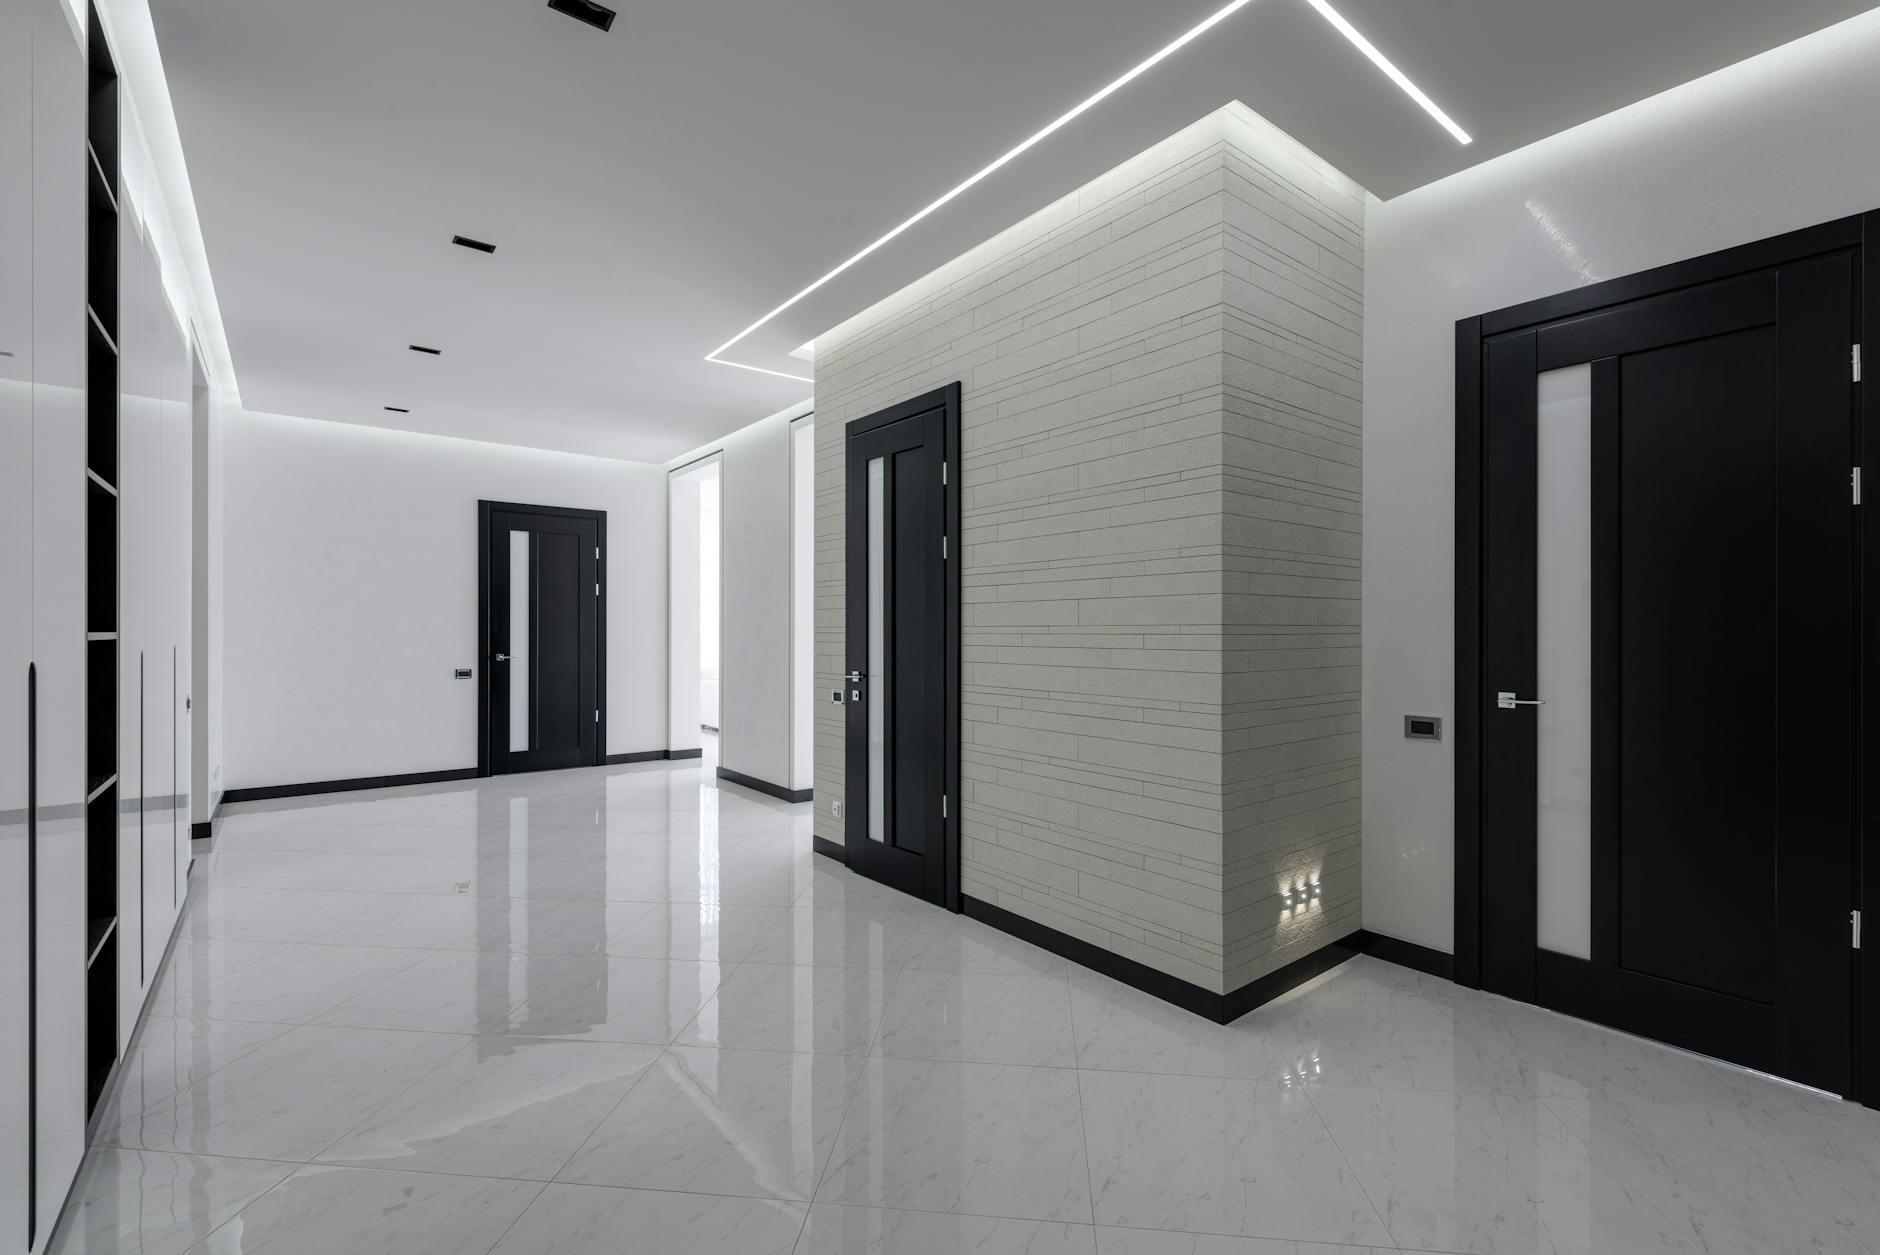 Modern spacious corridor with white walls and floor and black doors and ceiling decorated with LED lights